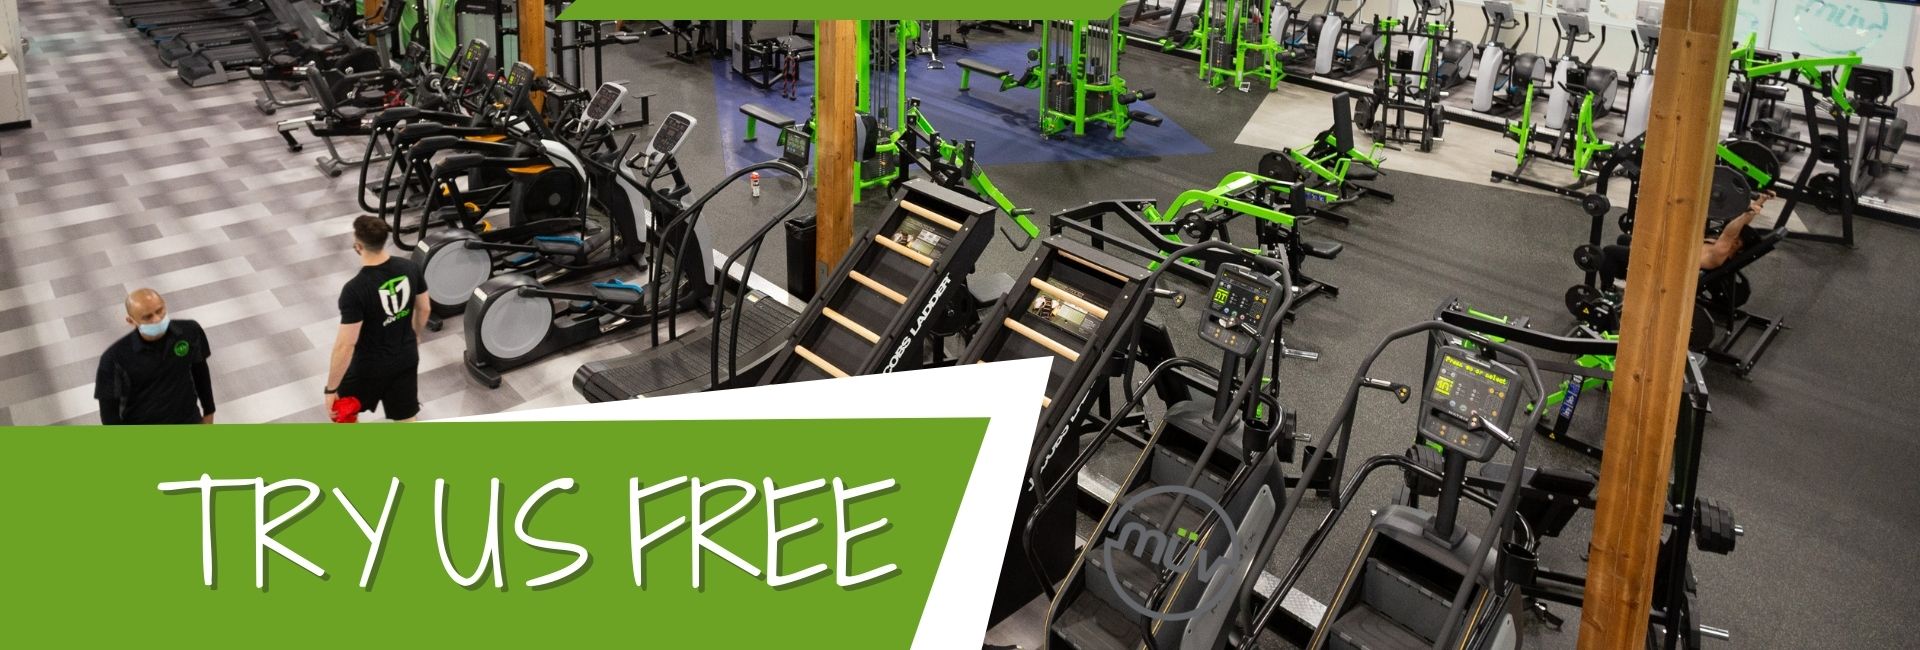 Free Pass gym near me in West Columbia